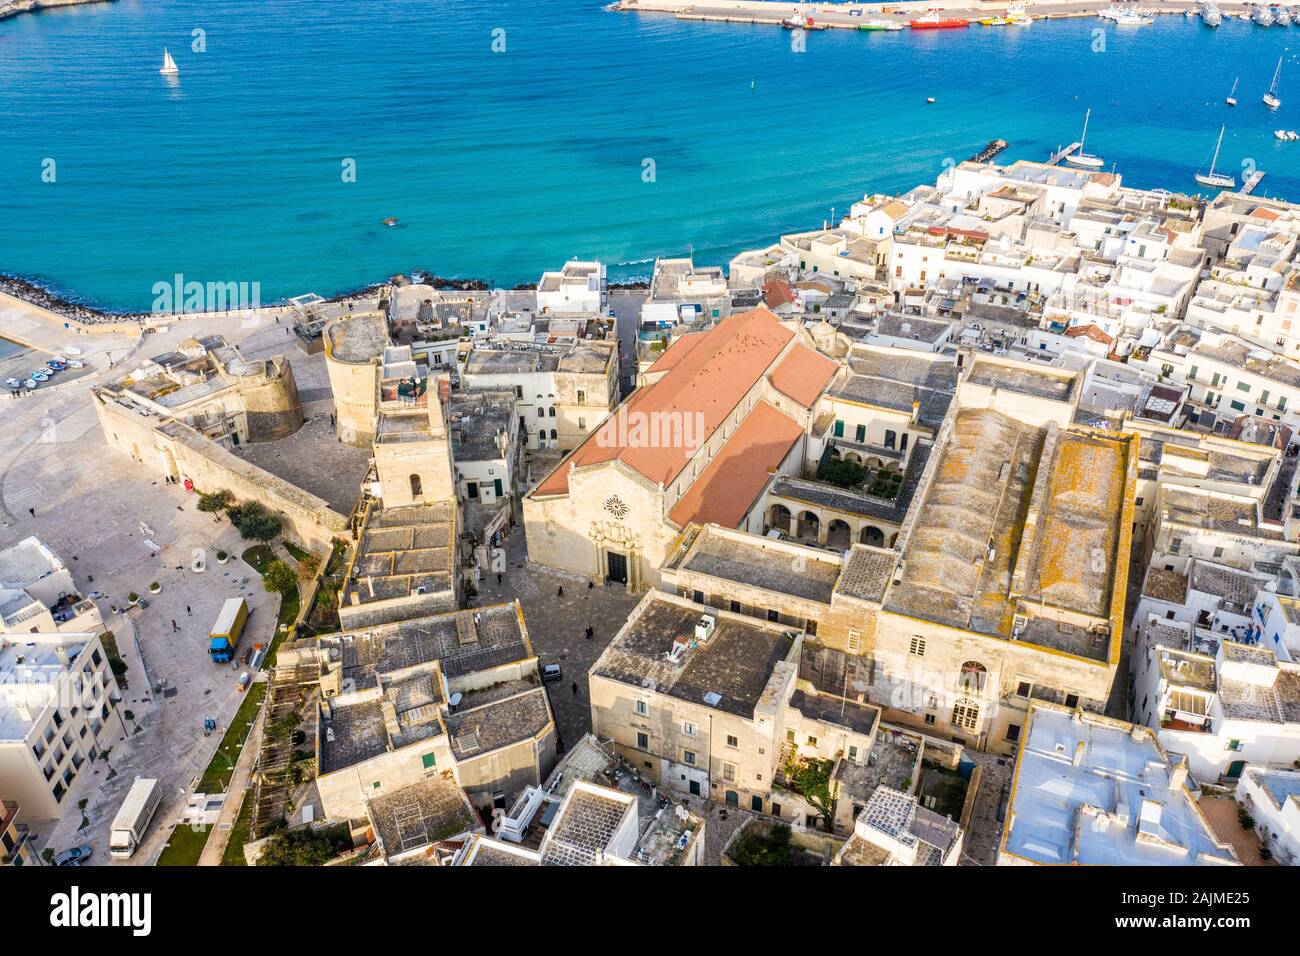 Cathedral of Saint Mary of the Announcement, Otranto, Puglia, Italy Stock Photo